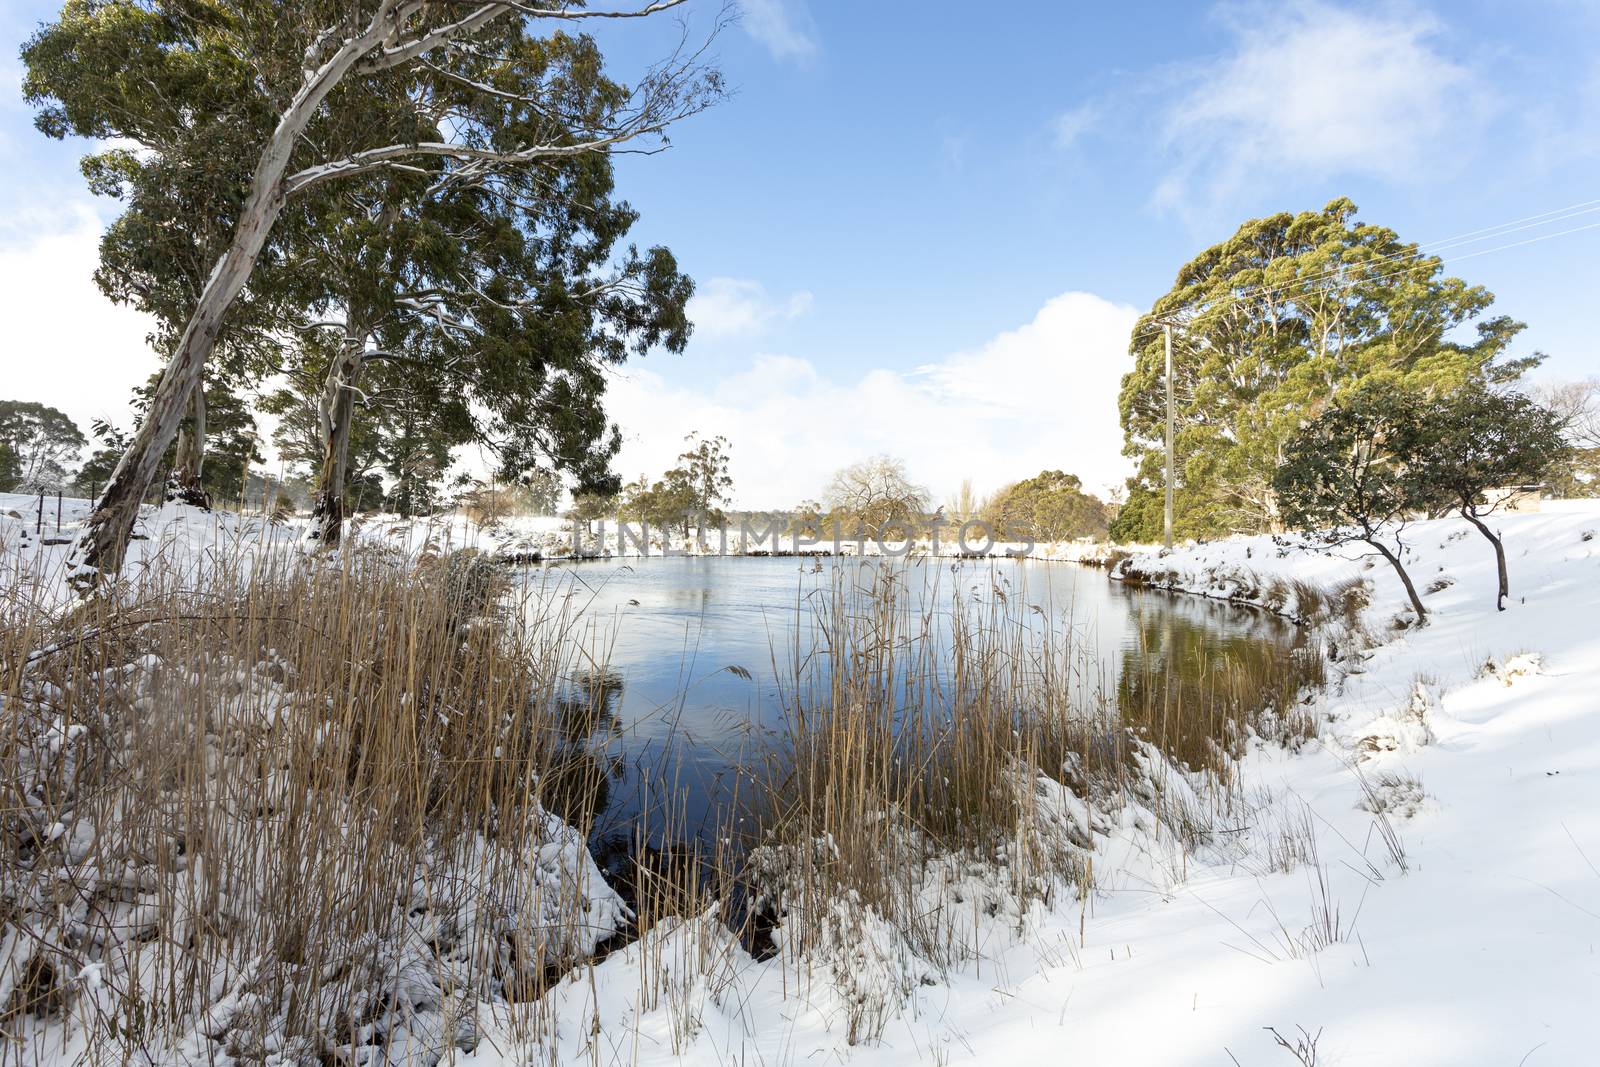 A snow covered field and watering hole or dam.  A brief break in clouds allows the sun to shine